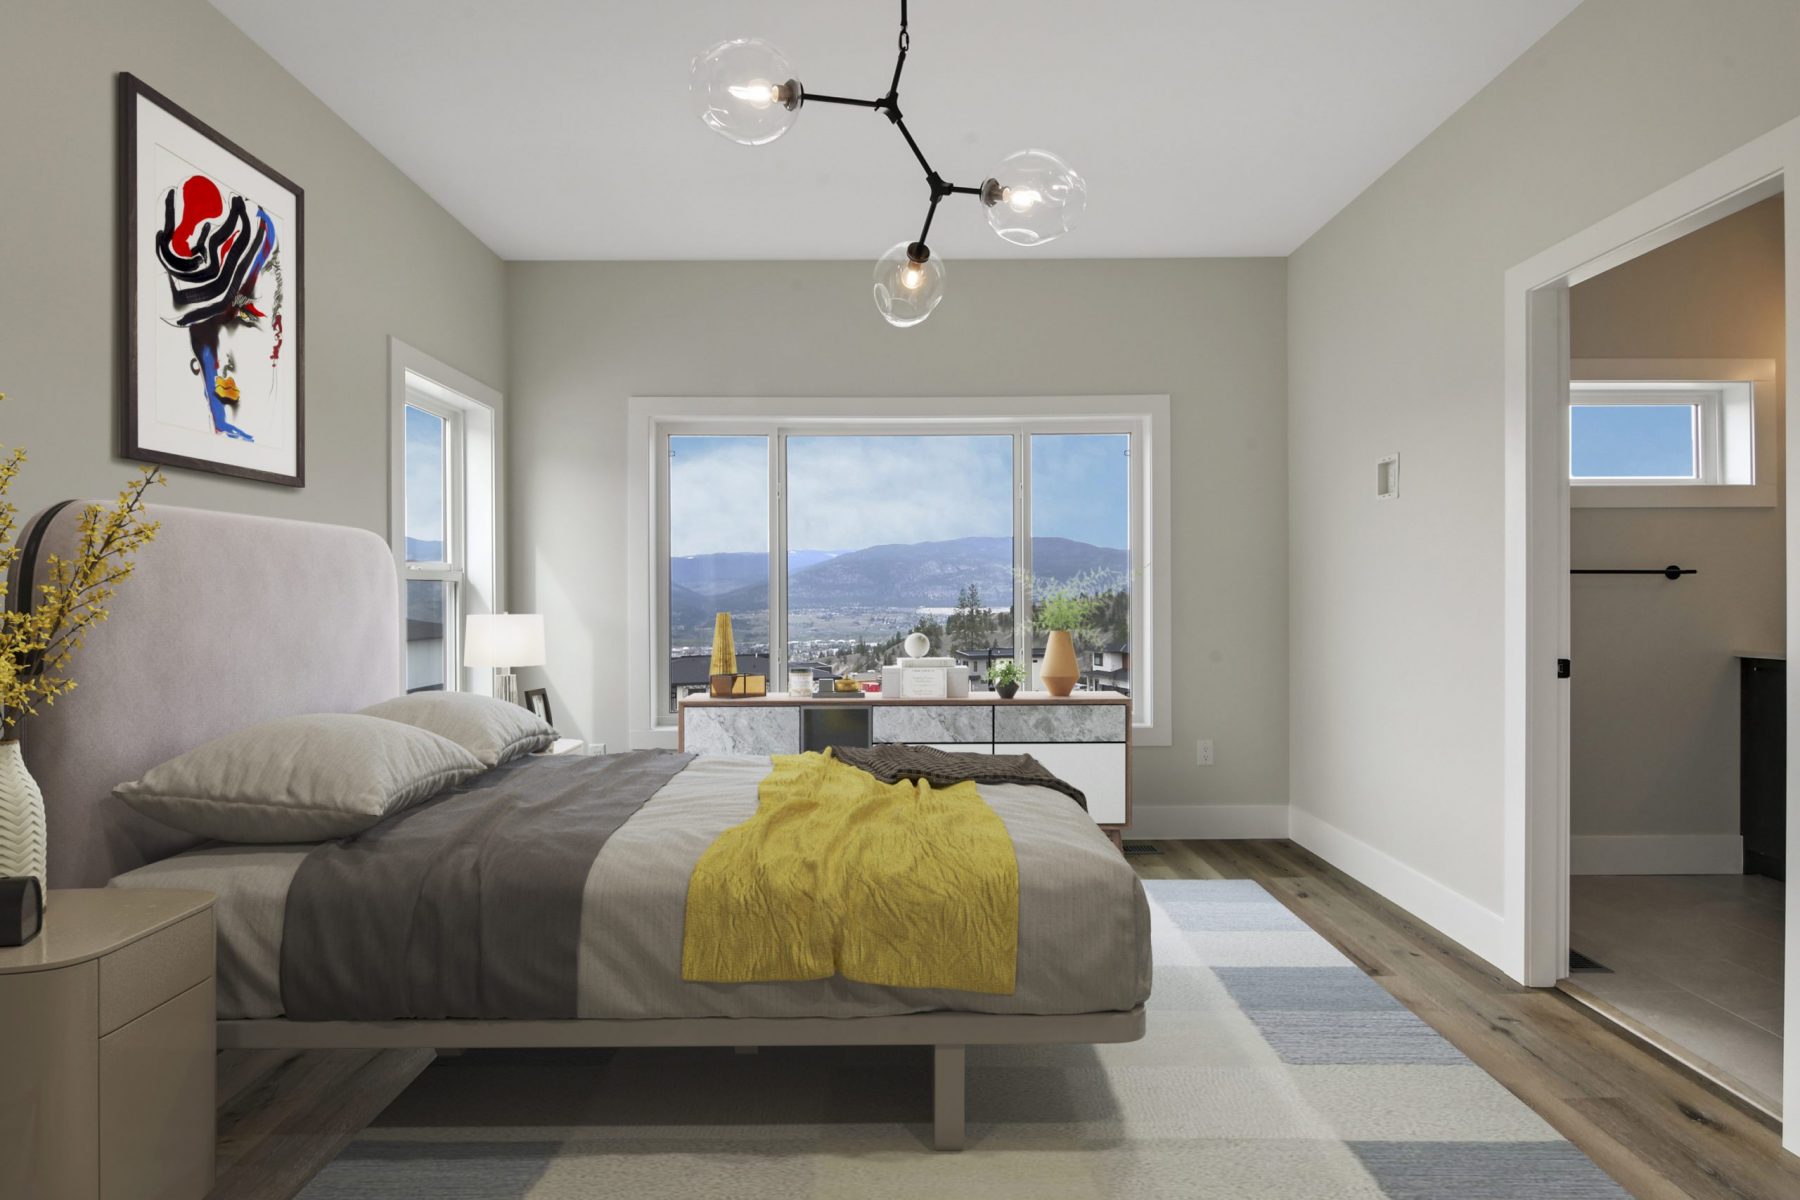 harmony_homes_the_ridge_multi_family_project_bed_room_gallery_image_5